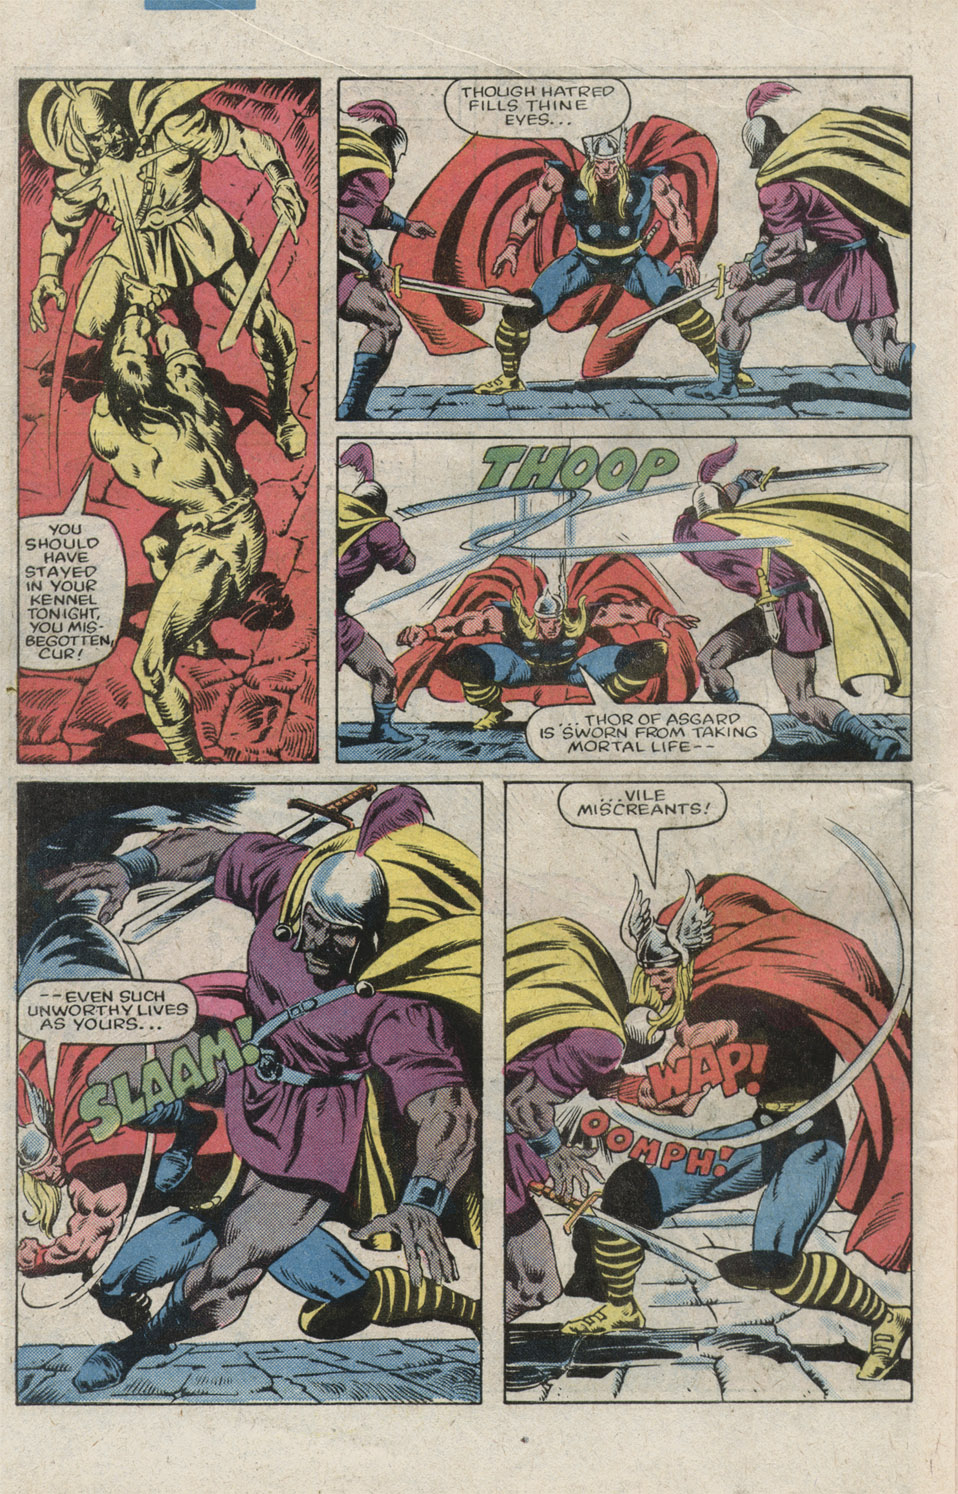 What If? (1977) issue 39 - Thor battled conan - Page 34